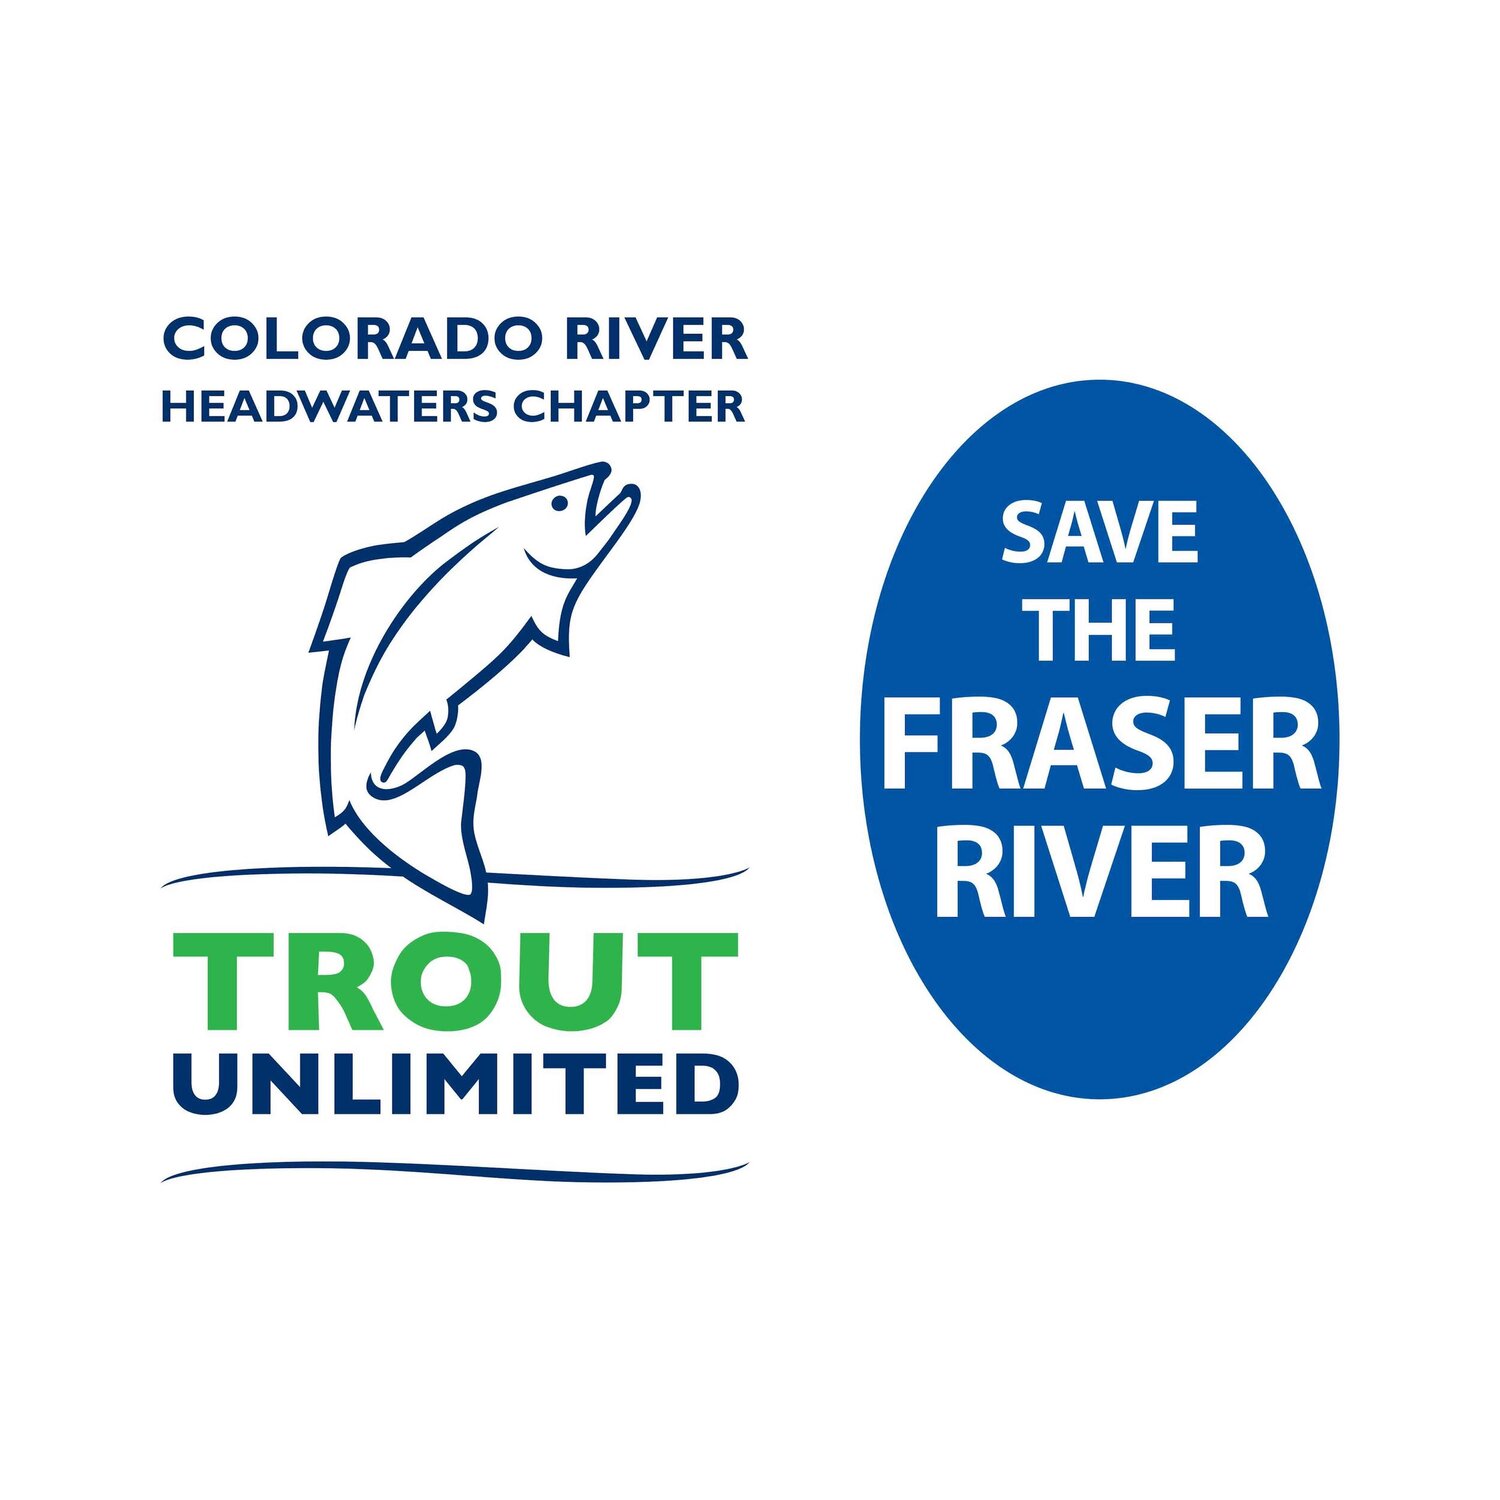 Colorado River Headwaters Chapter of Trout Unlimited